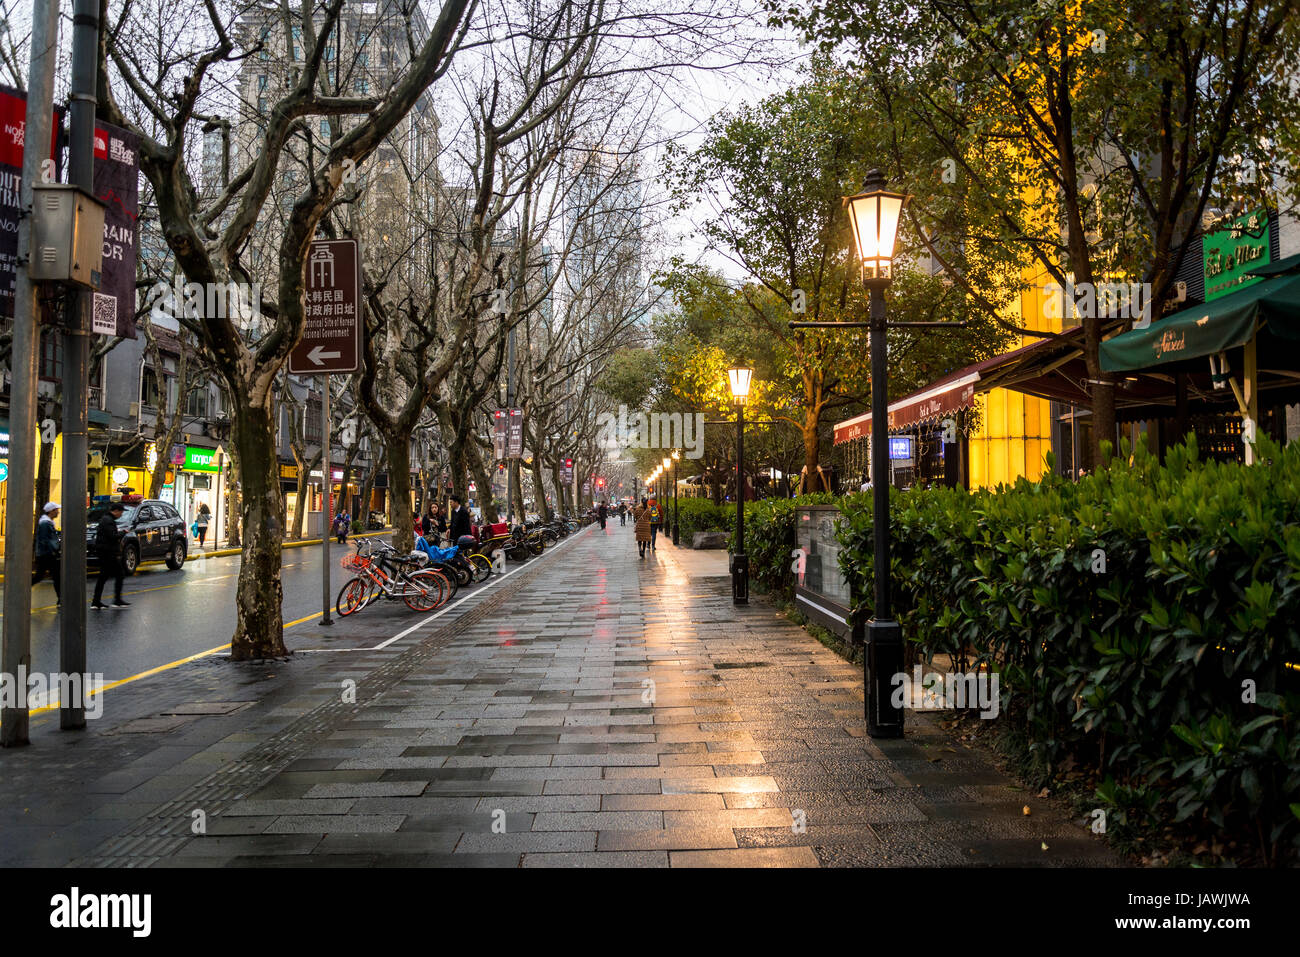 Street in French Concession area, Shanghai, China Stock Photo